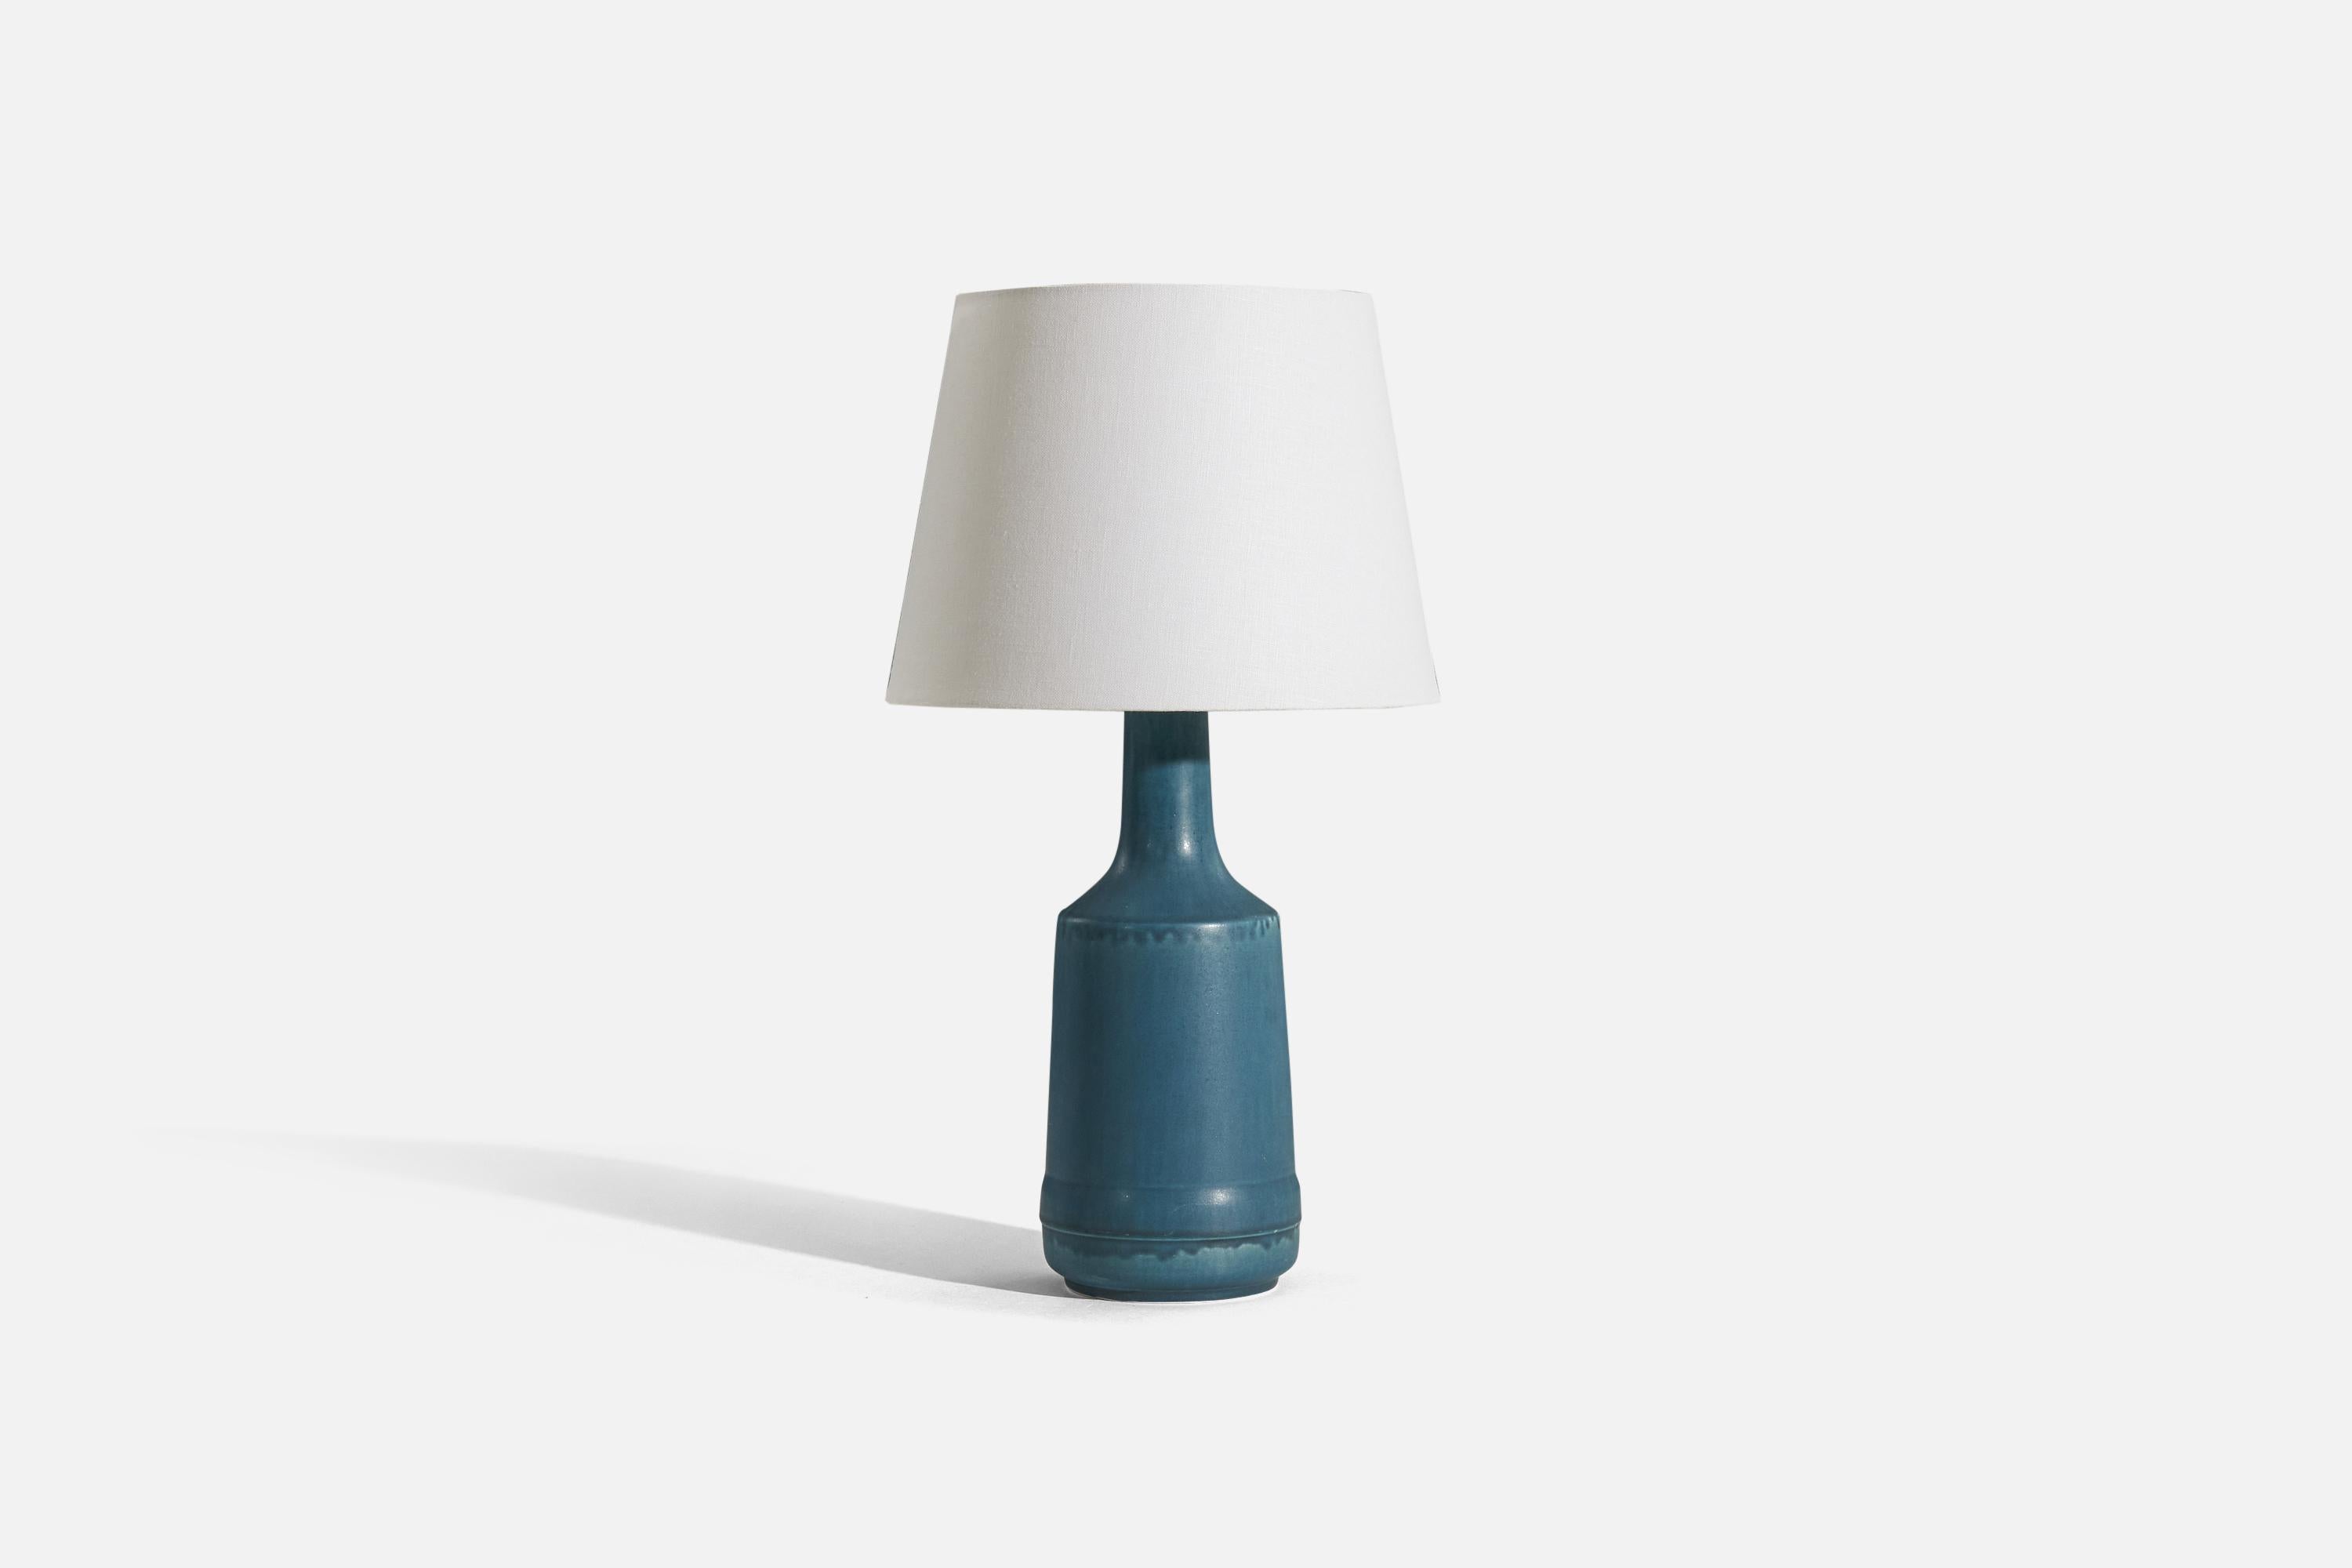 A blue, glazed stoneware table lamp designed and produced by Desiree Stentøj, Denmark, 1960s. 

Sold without lampshade. 
Dimensions of Lamp (inches) : 16.125 x  5.5 x 5.5 (H x W x D)
Dimensions of Shade (inches) : 9 x 12.125 x 9.0625 (T x B x